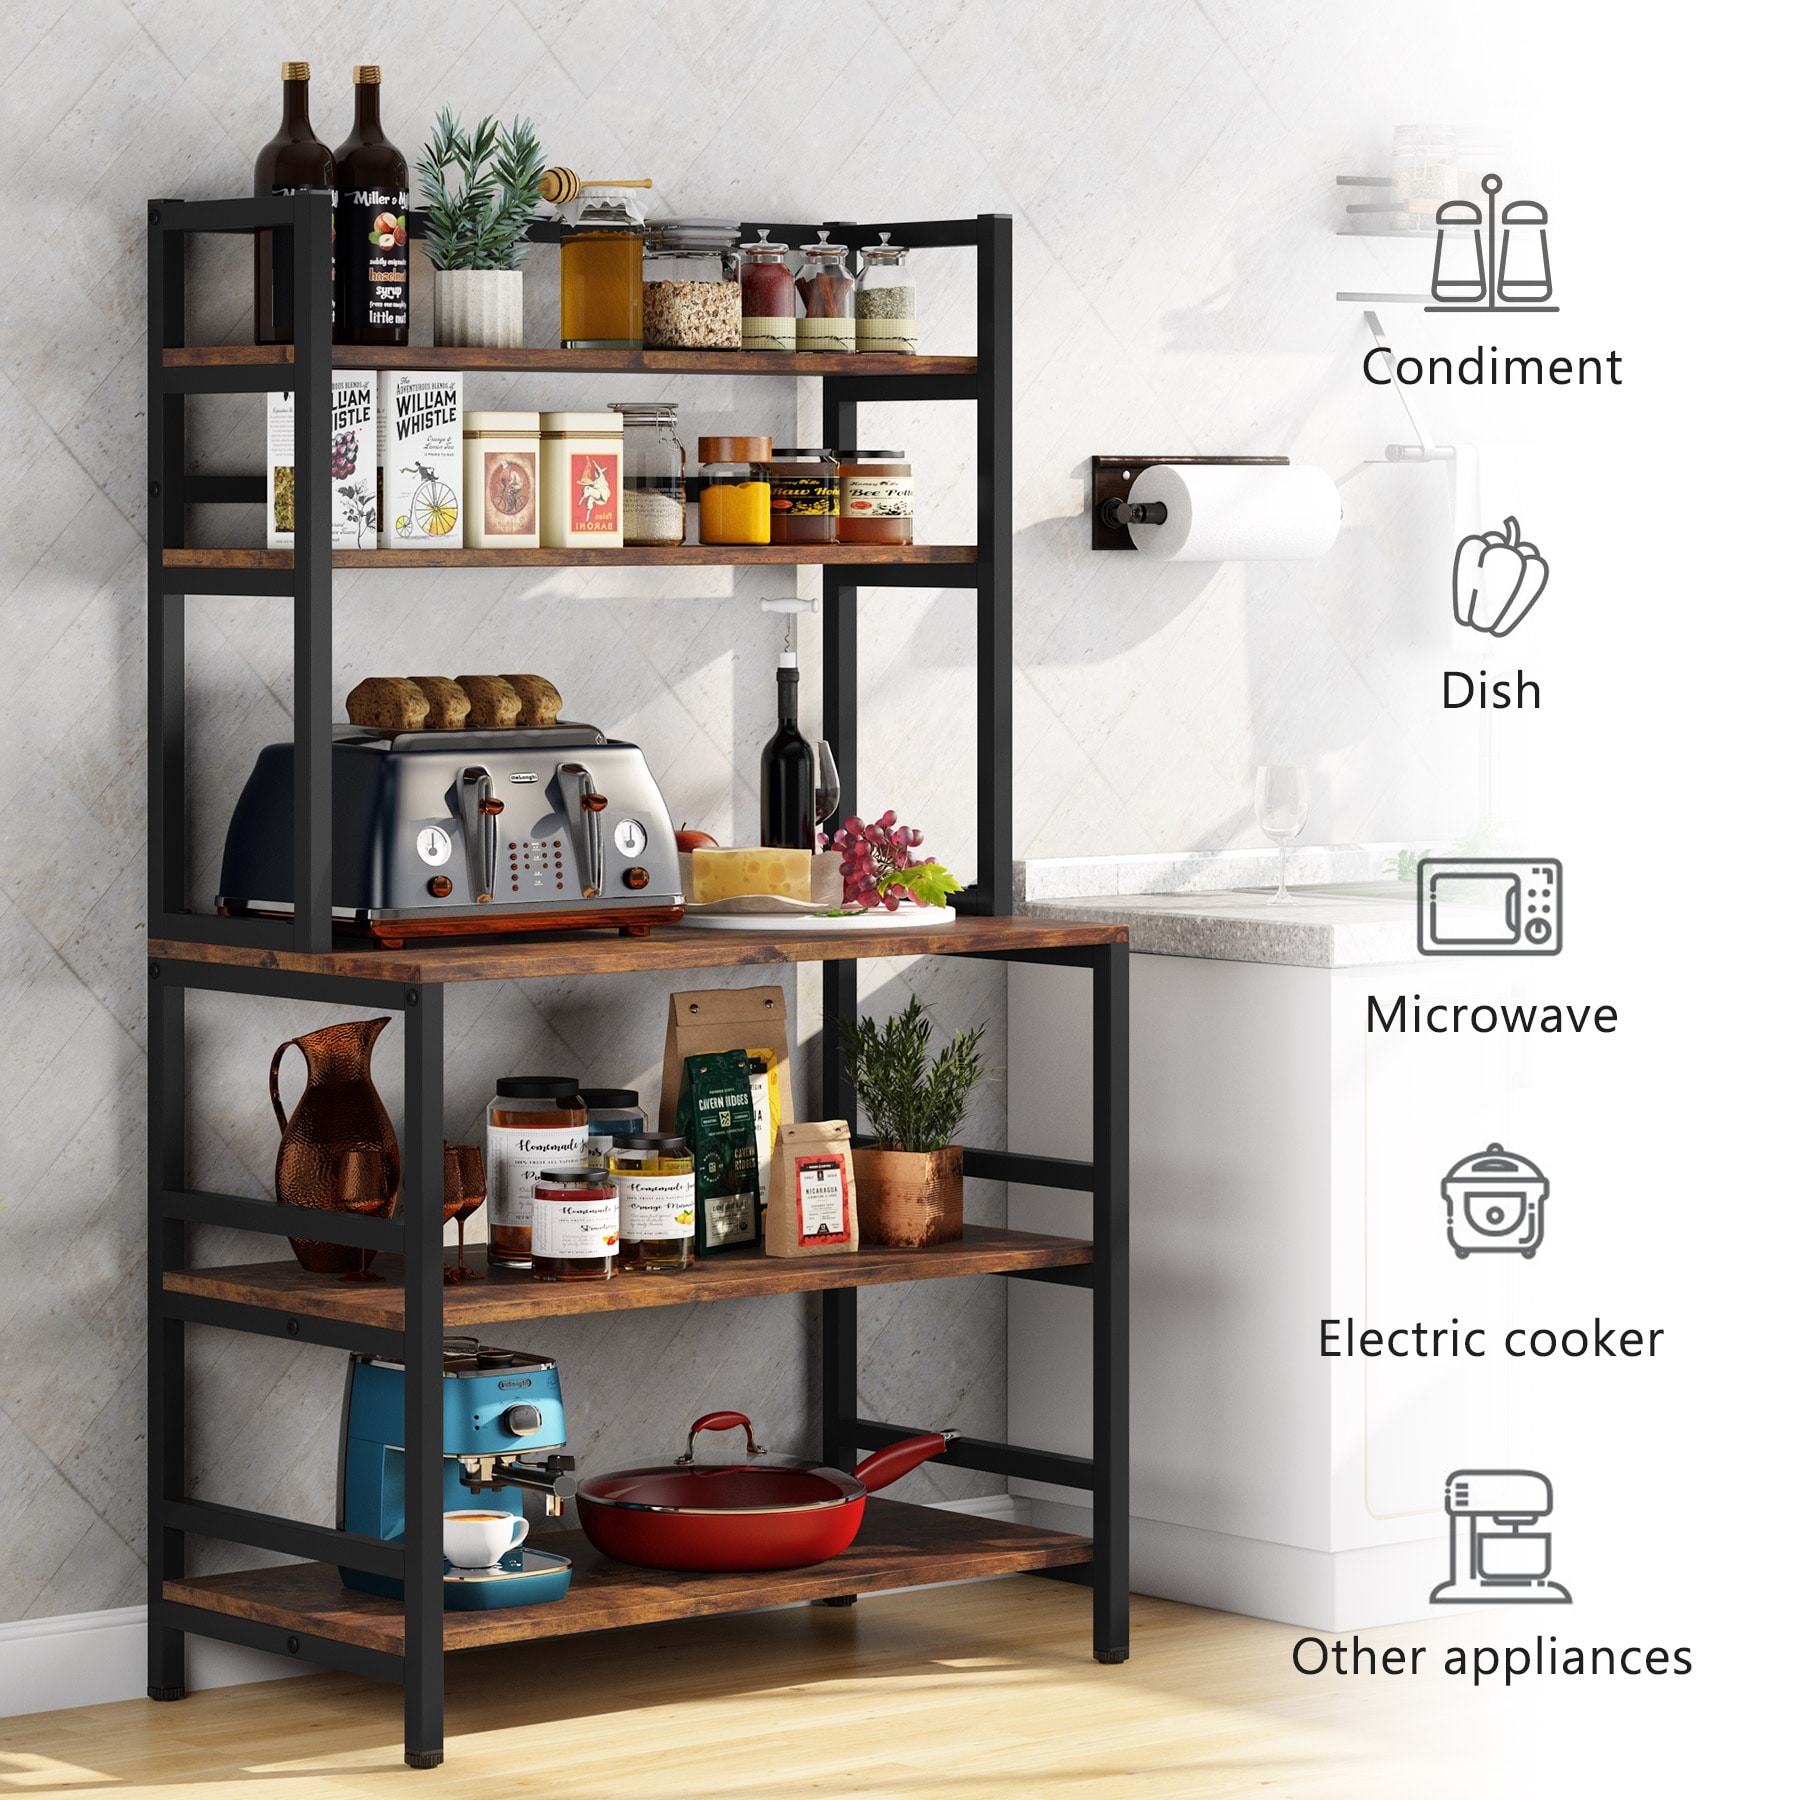 Trnni Shelf, for Storage Racks with Kitchen Cabinets Coffee Bar, 5 Shelf  Microwave Oven Stand Metal Frame with 3 Drawer Type Wire Baskets Rolling  Cart